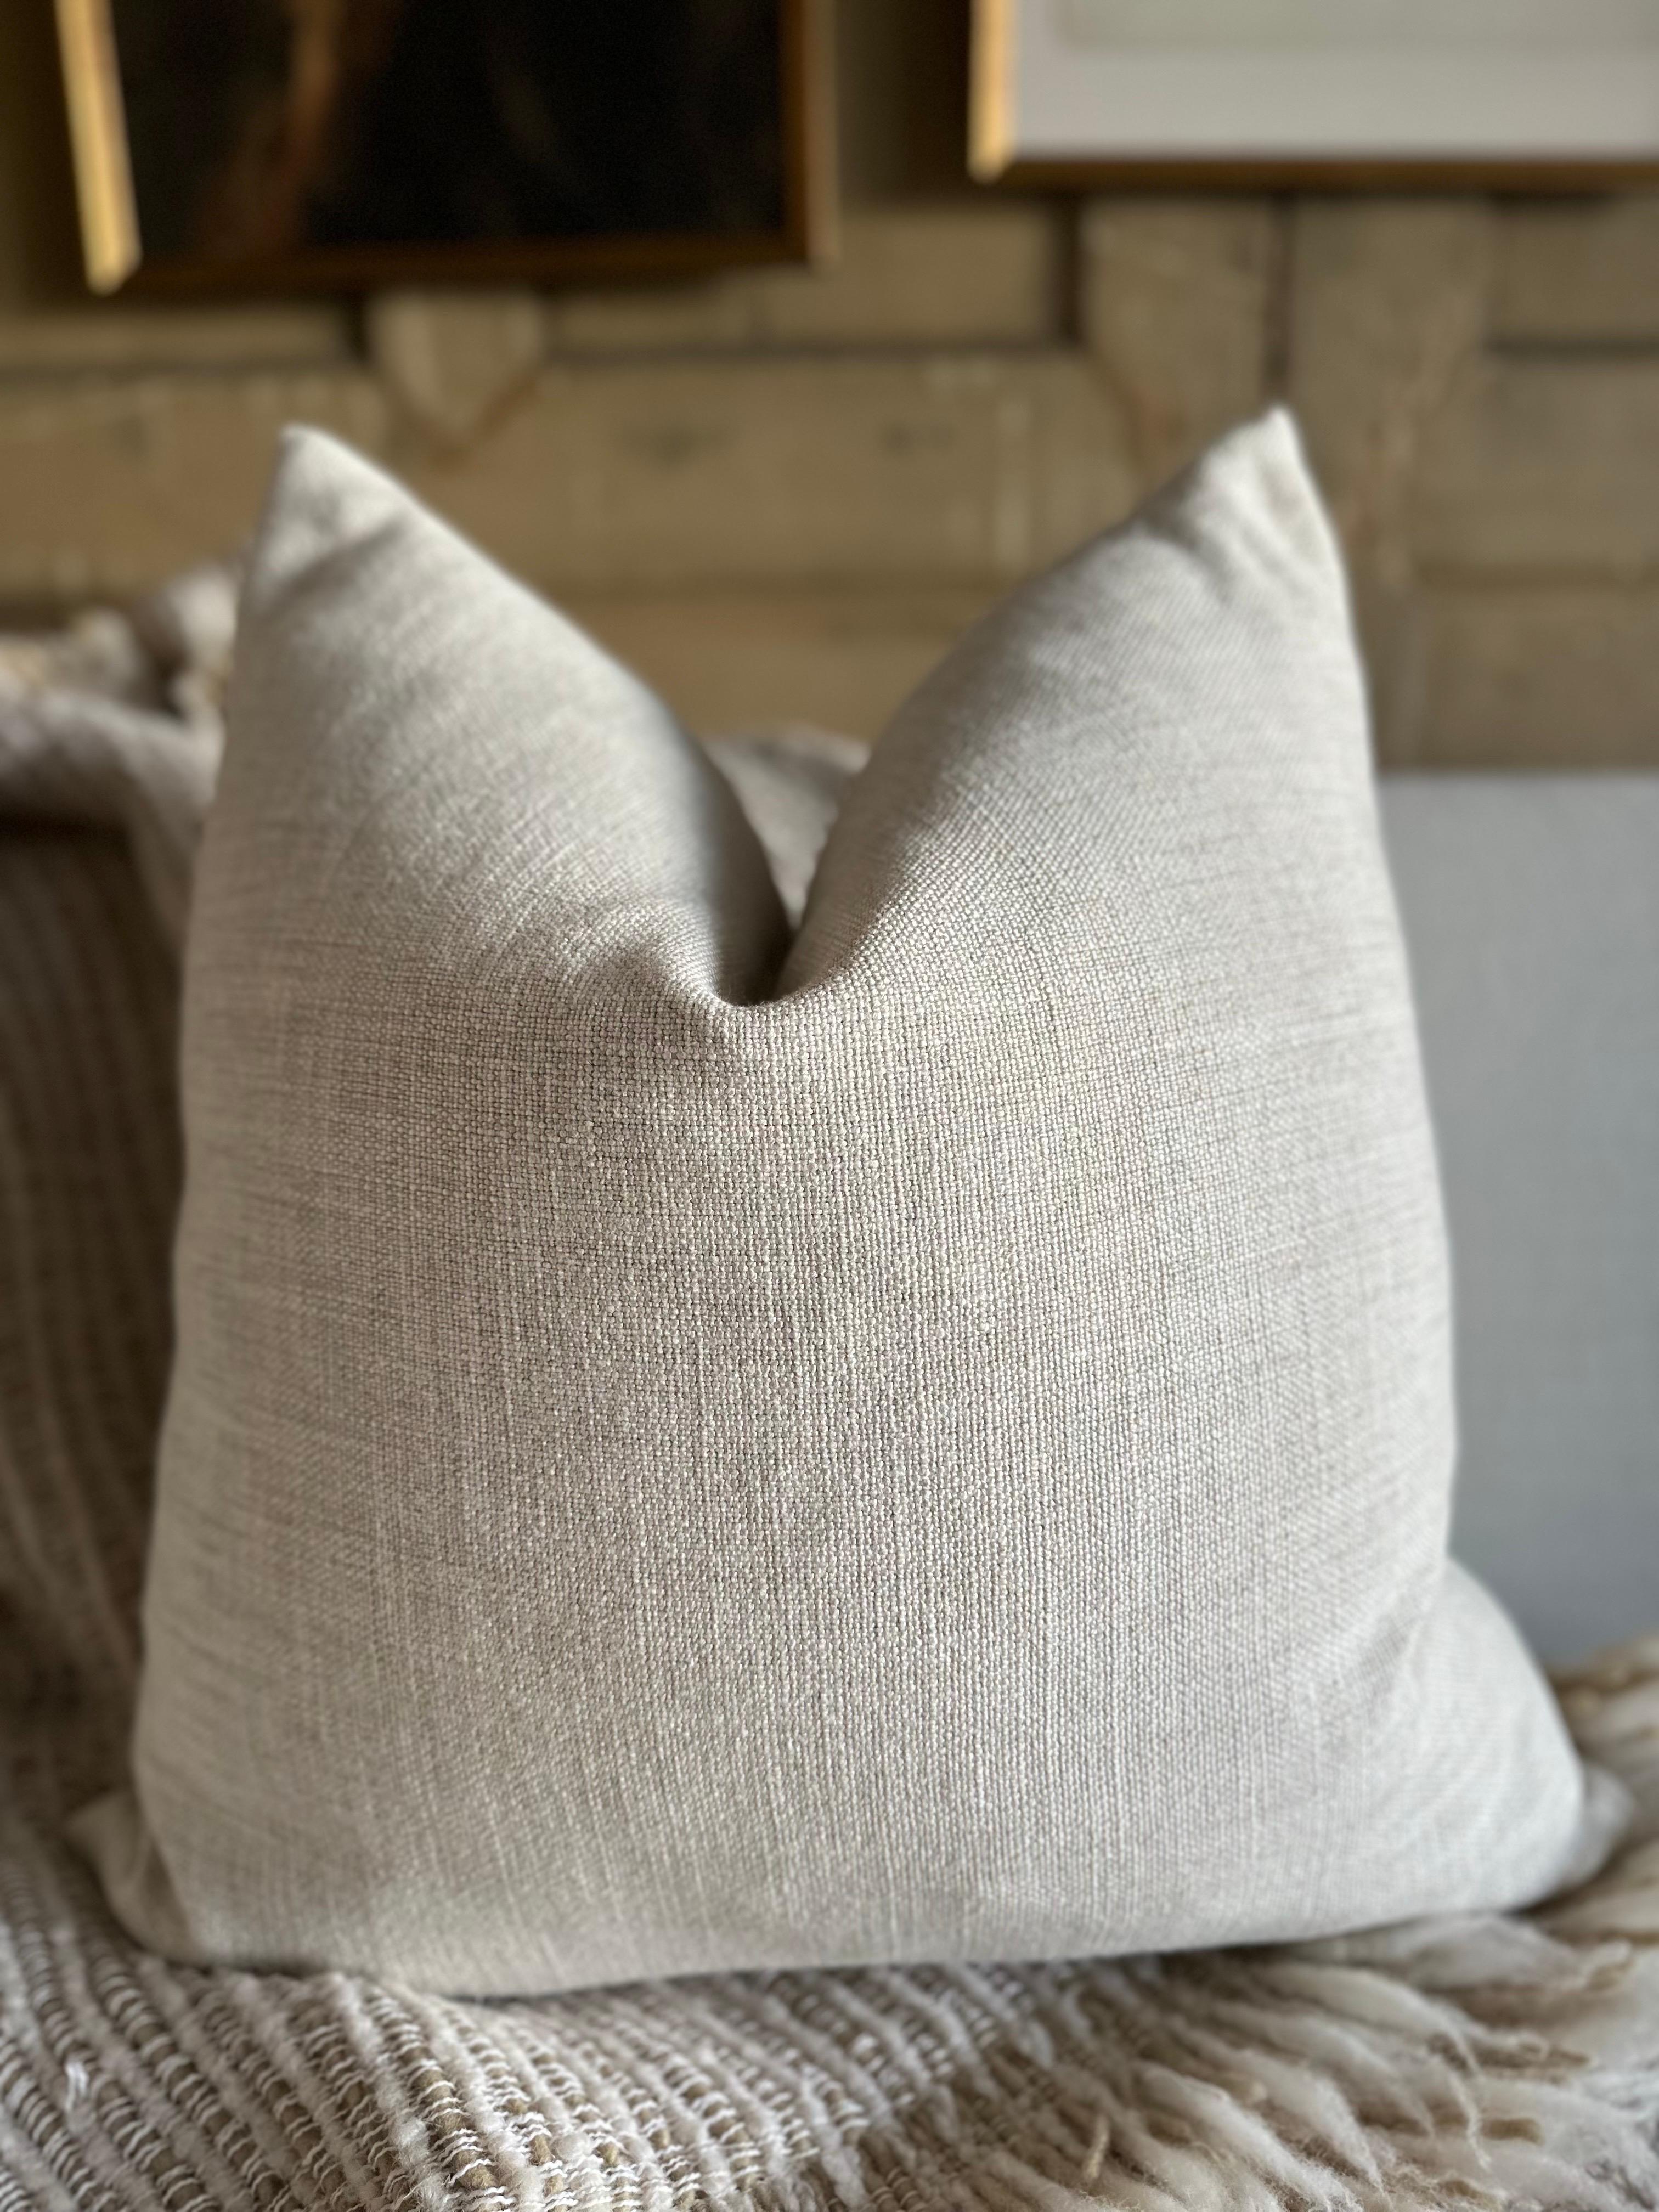 Linen Blend pillow in an oyster white color with a stone wash finish.
Antique Brass Zipper closure
Overlocked seams.
Includes Down Feather Insert
Color: OYSTER WHITEBelgian Linen Pillow with Down Insert in Natural
Size: 22x22
51,000 Double